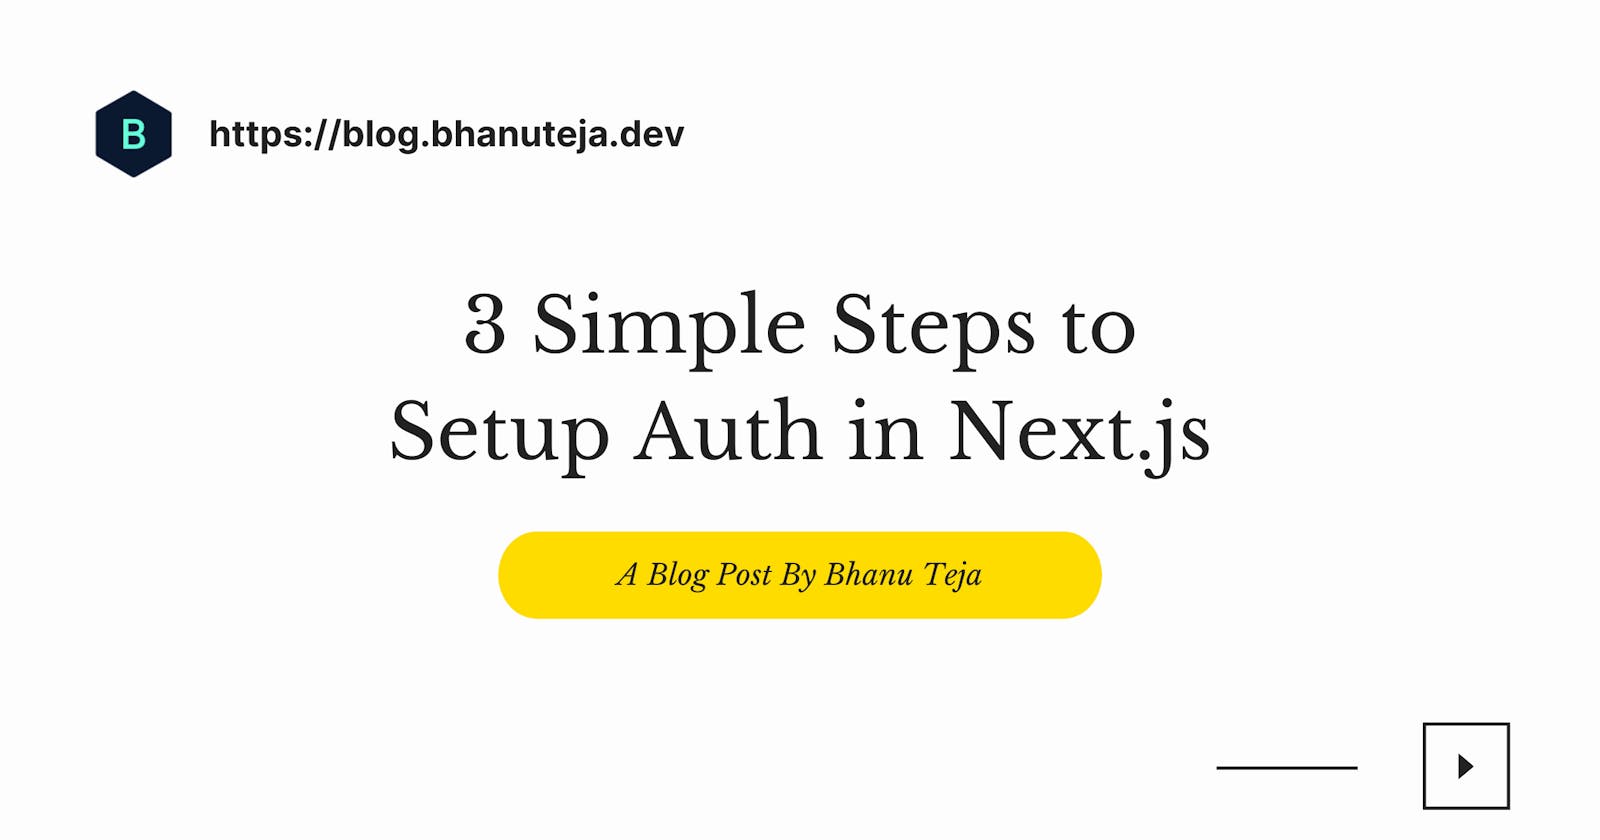 3 Simple Steps To Setup Authentication in Next.js